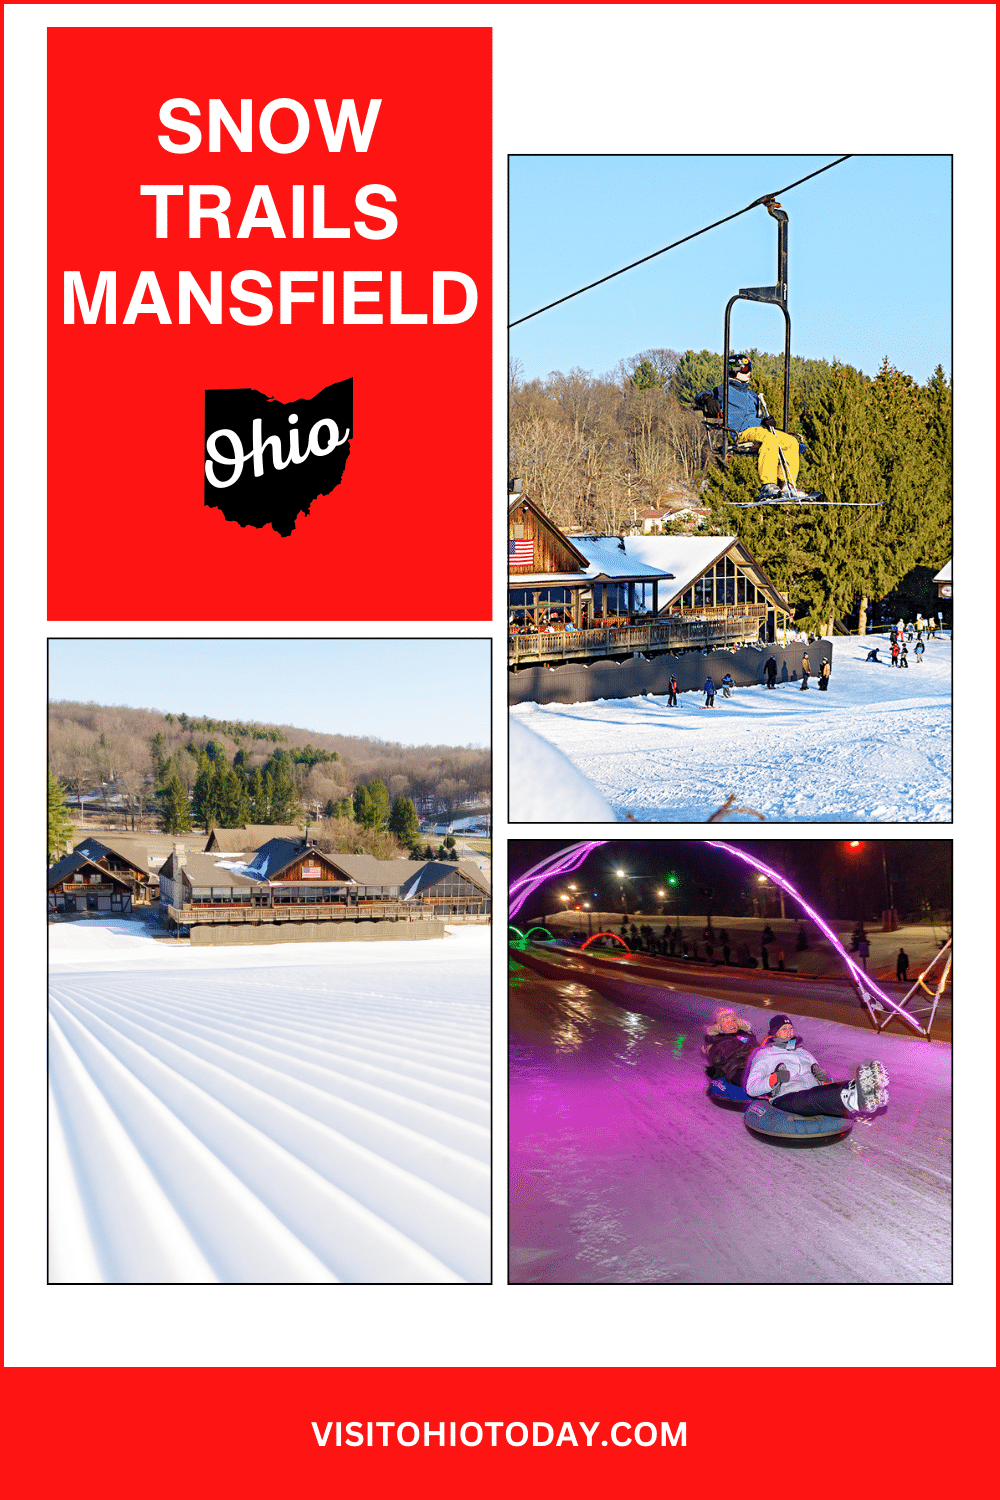 vertical image with three photos from Snow Trails Mansfield with a red box in the top left corner containing the text Snow Trails Mansfield